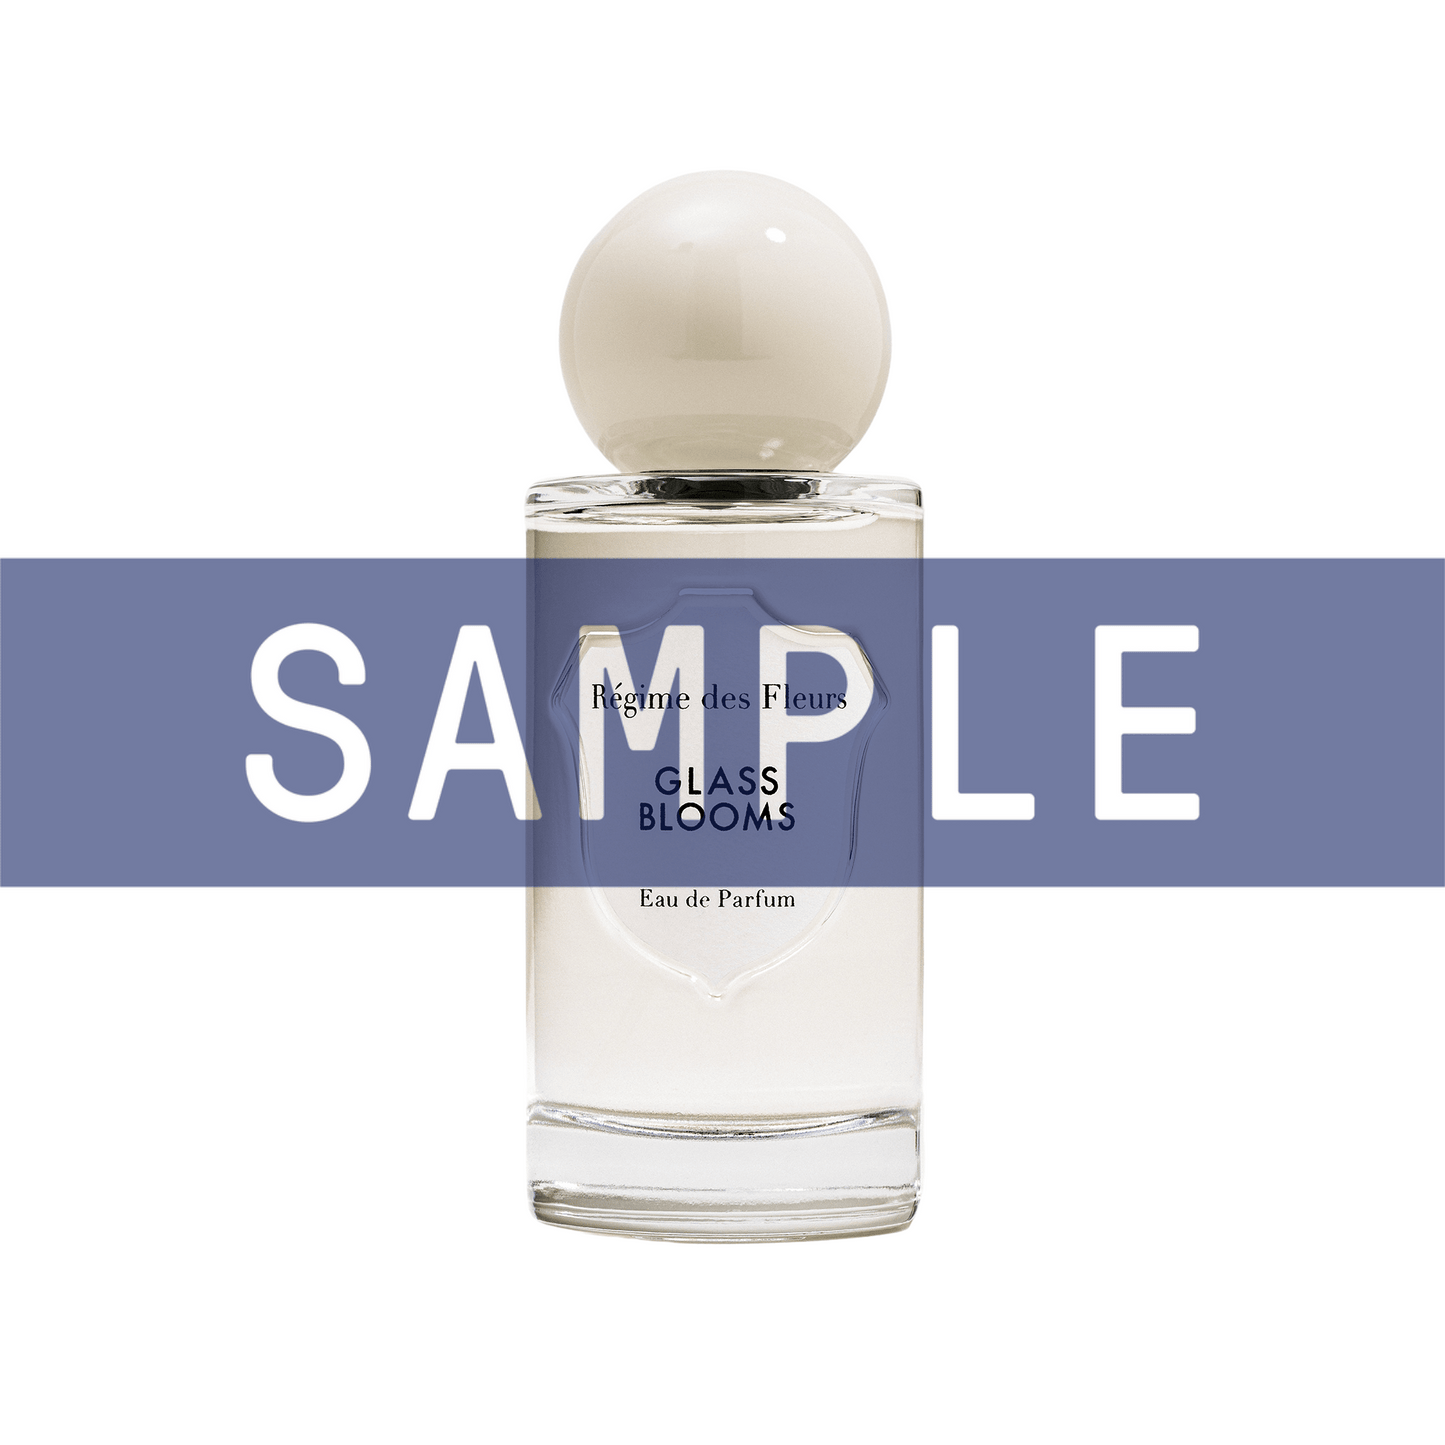 Primary Image of Sample - Glass Blooms EDP